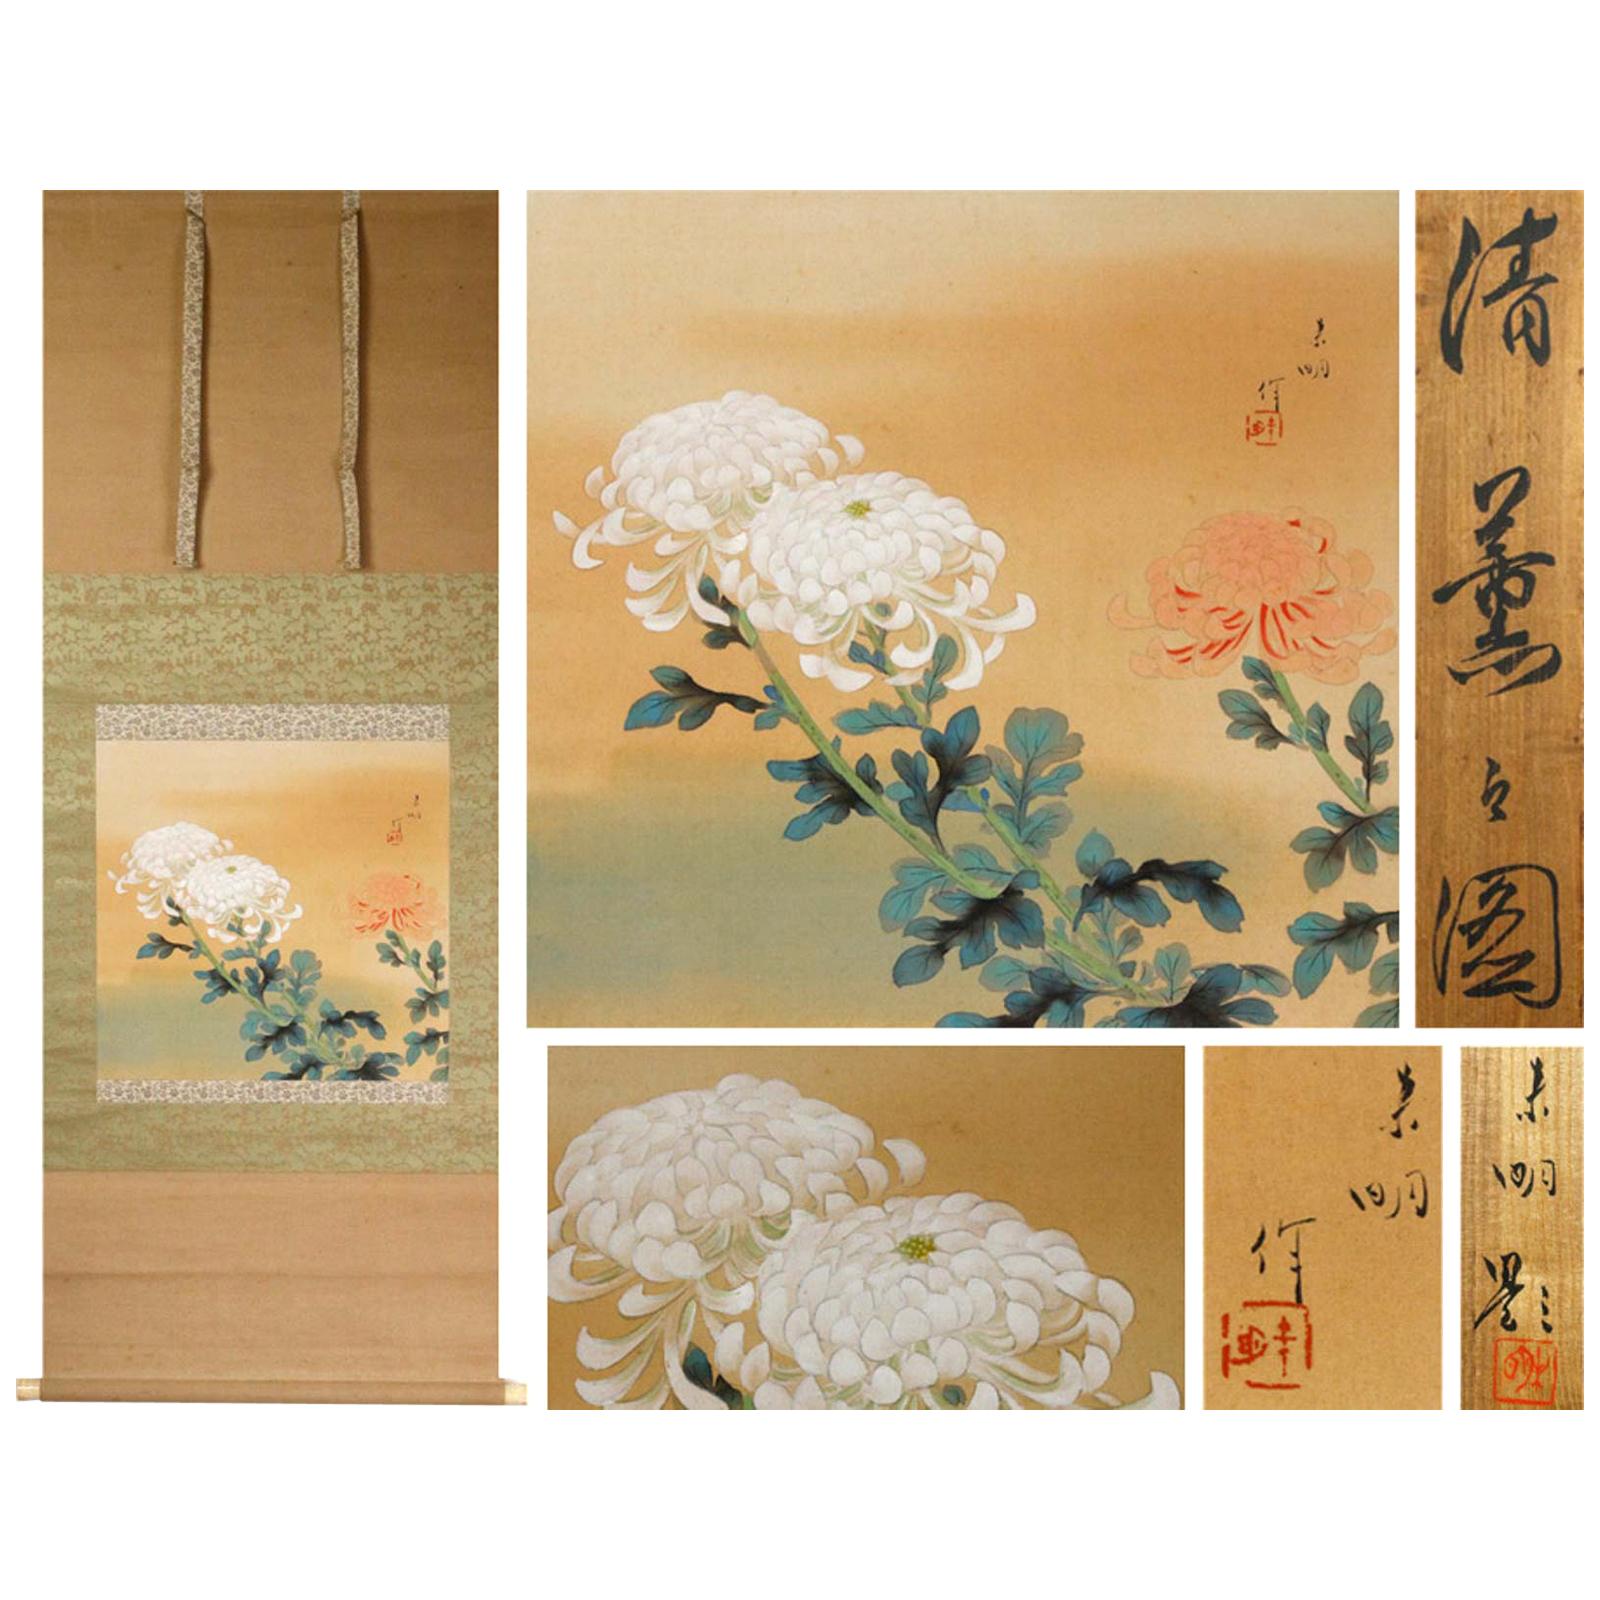 Lovely Scroll Painting Japan, 20th Century 'Showa' Artist Flower For Sale